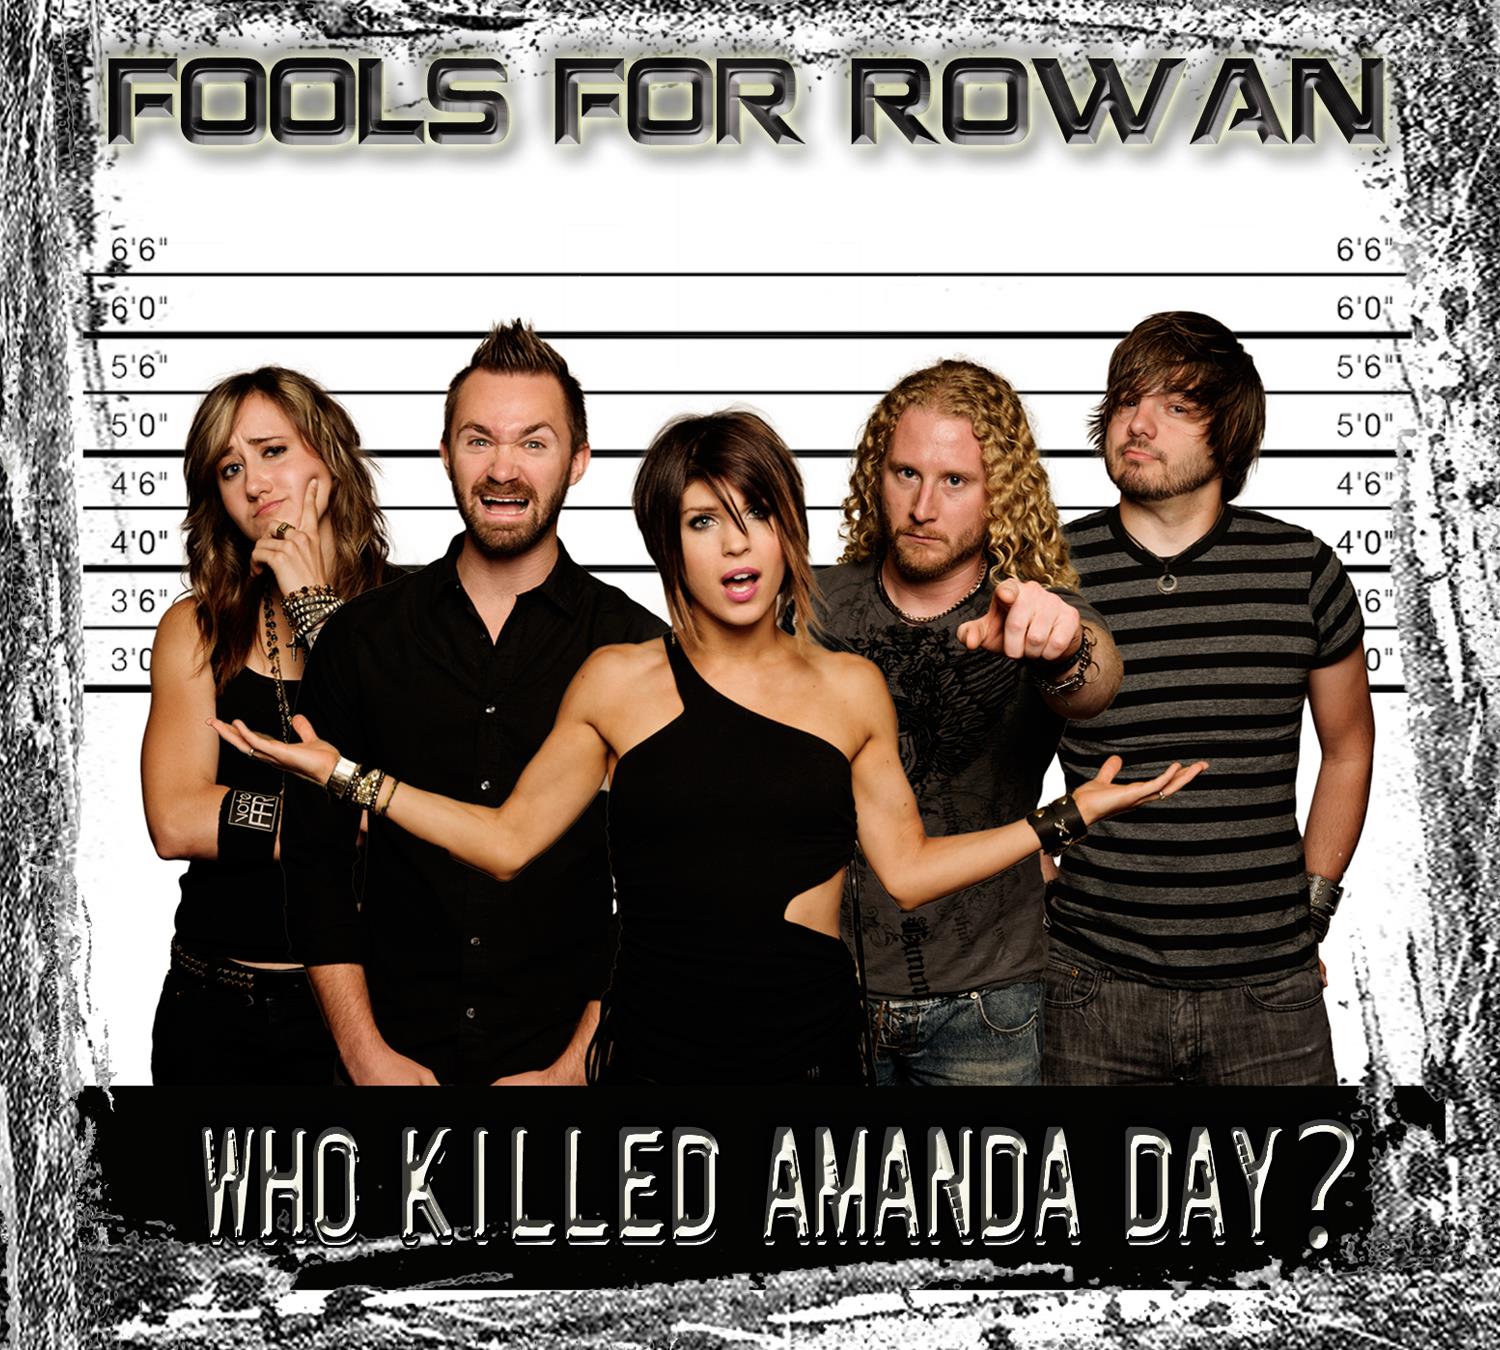 Fools For Rowan to debut second EP ‘Who Killed Amanda Day?’